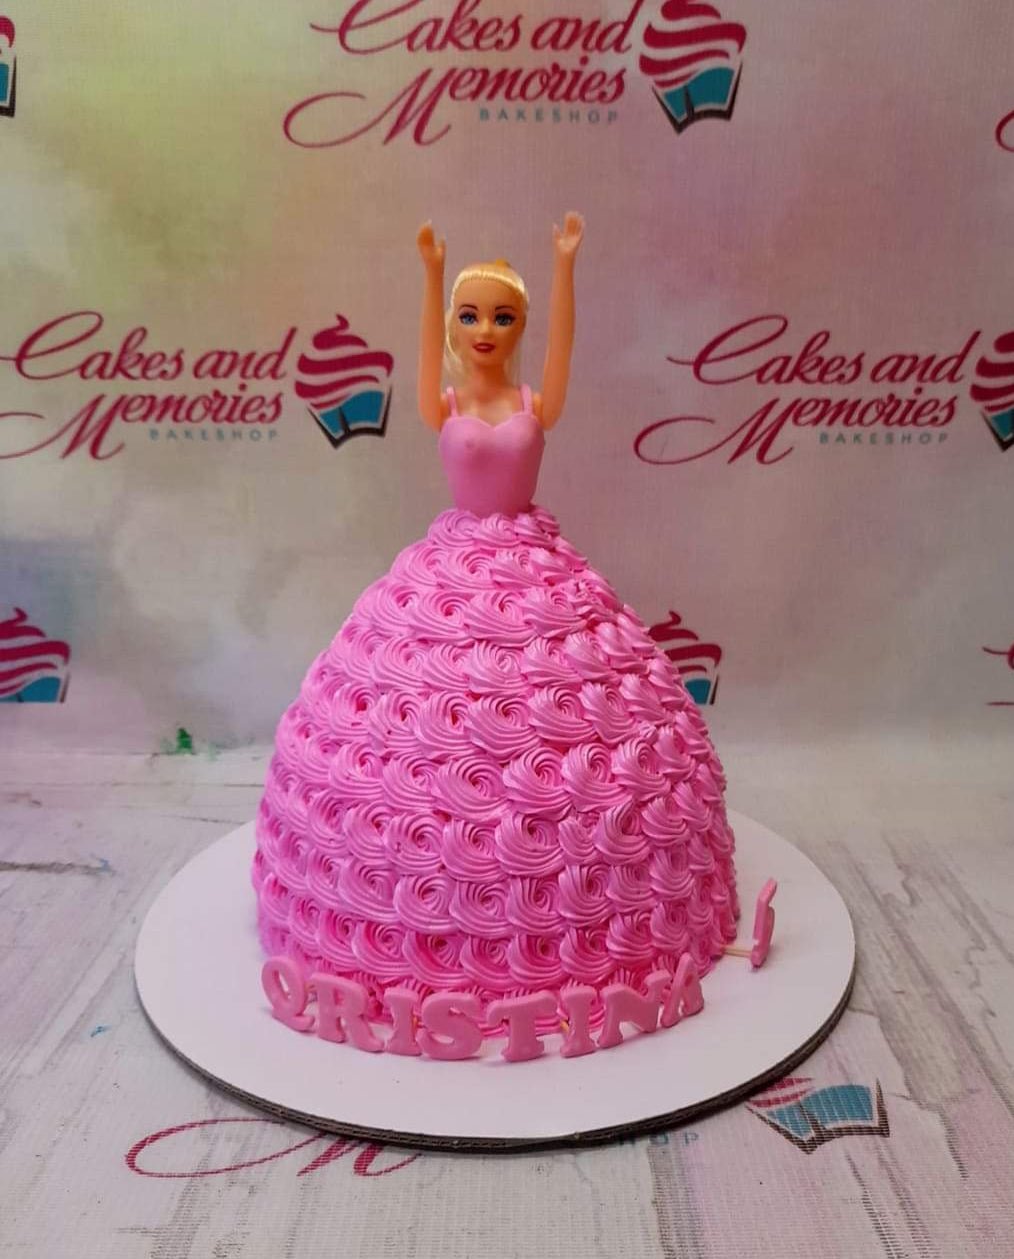 Barbie Girl Cake | Free Delivery | Carmel Flowers